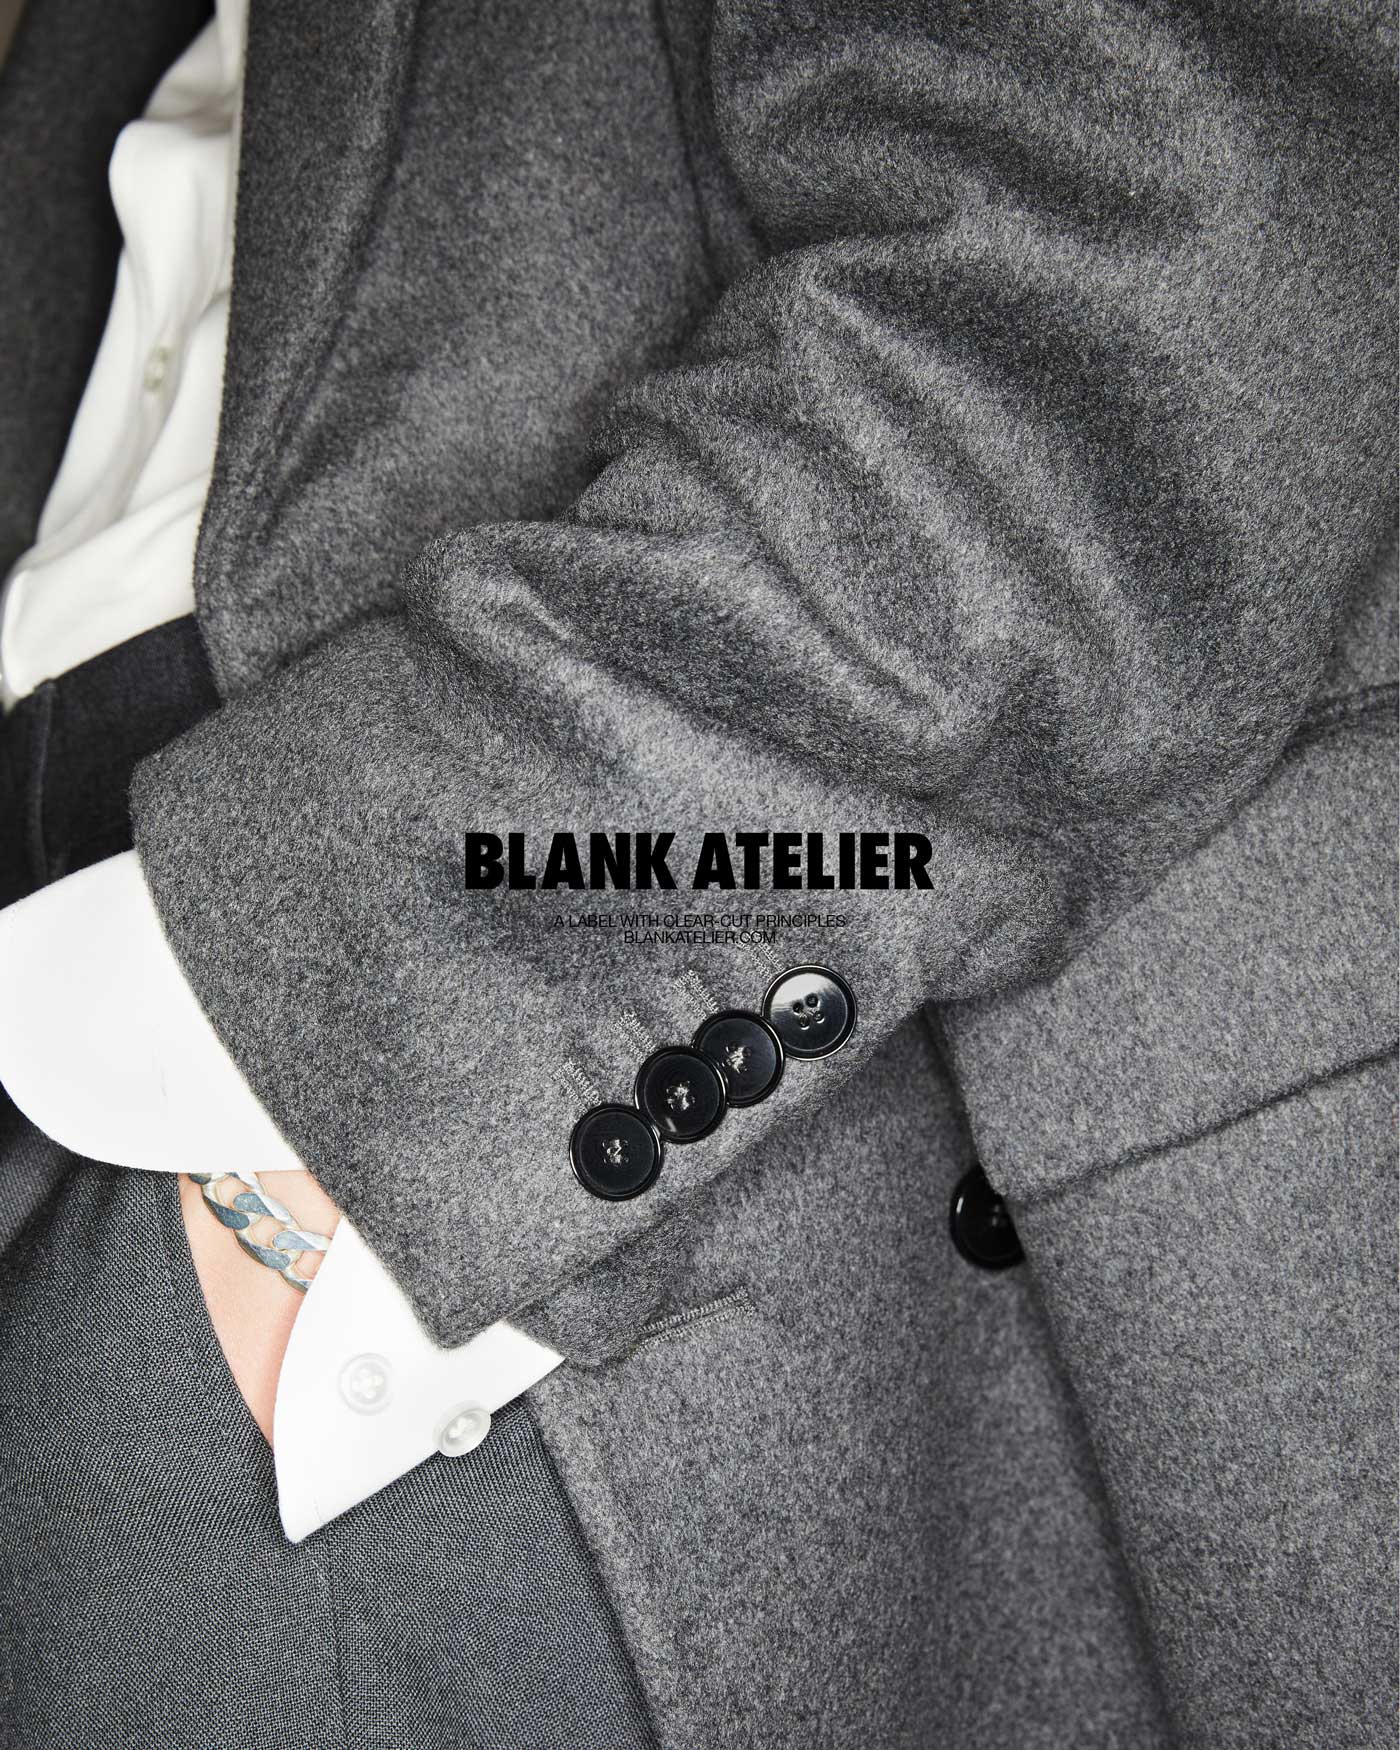 Blank Atelier – Campaign ad 2021